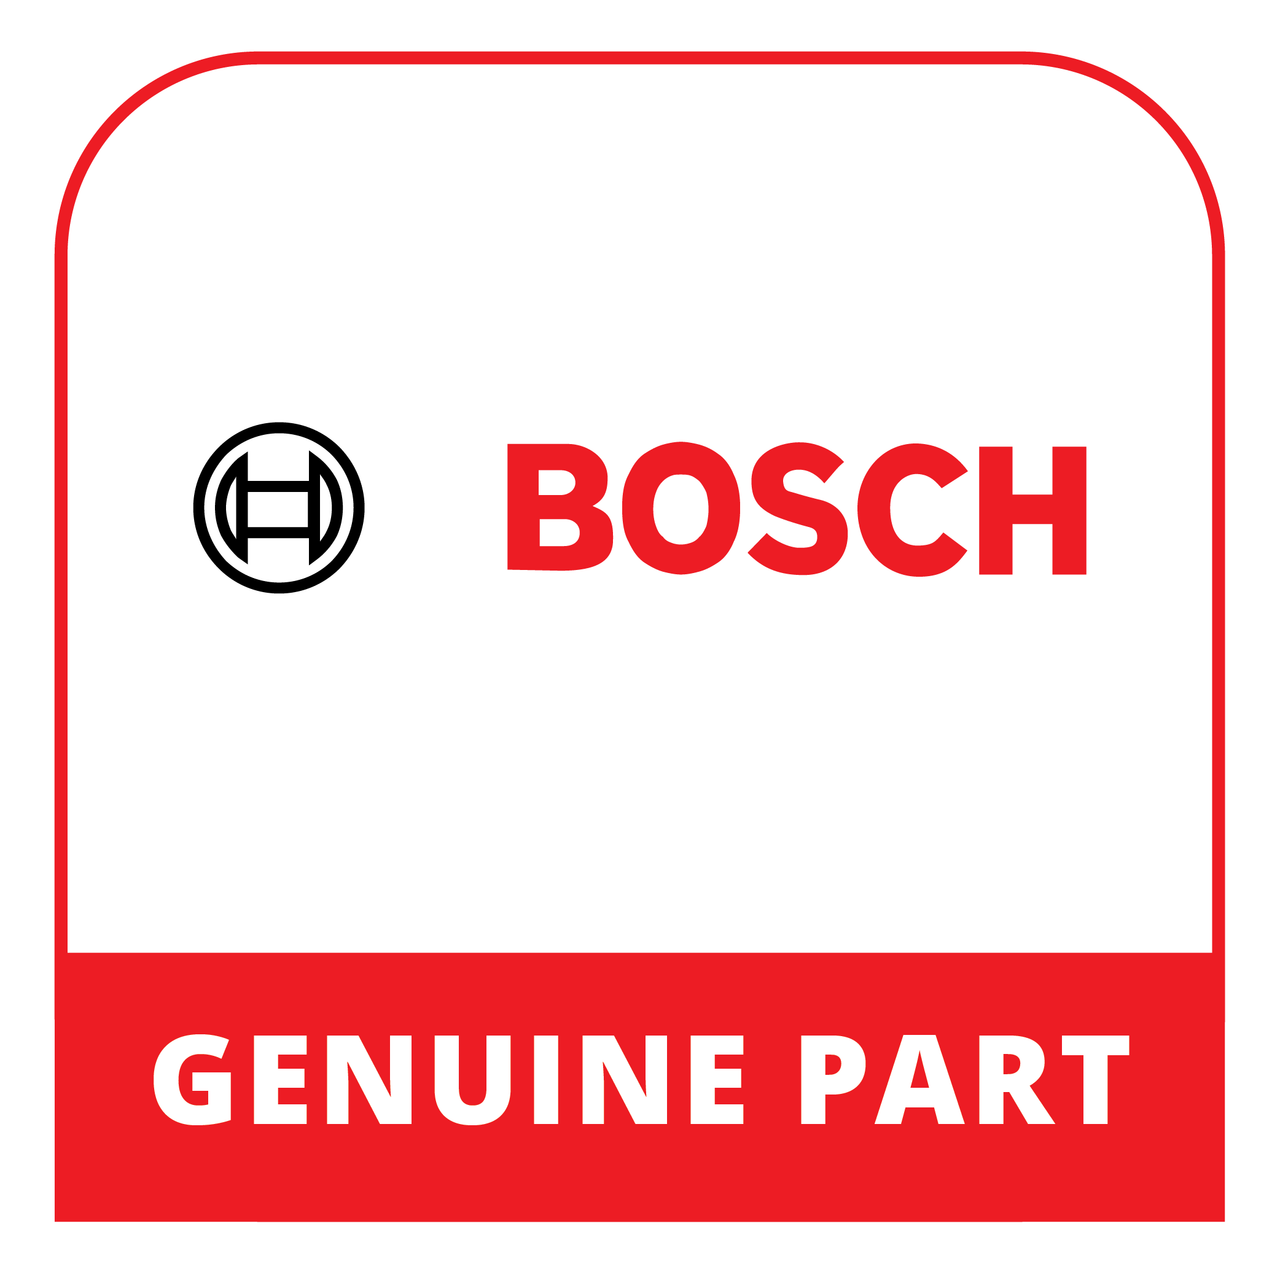 Bosch (Thermador) 00716431 - Panel Side - Genuine Bosch (Thermador) Part